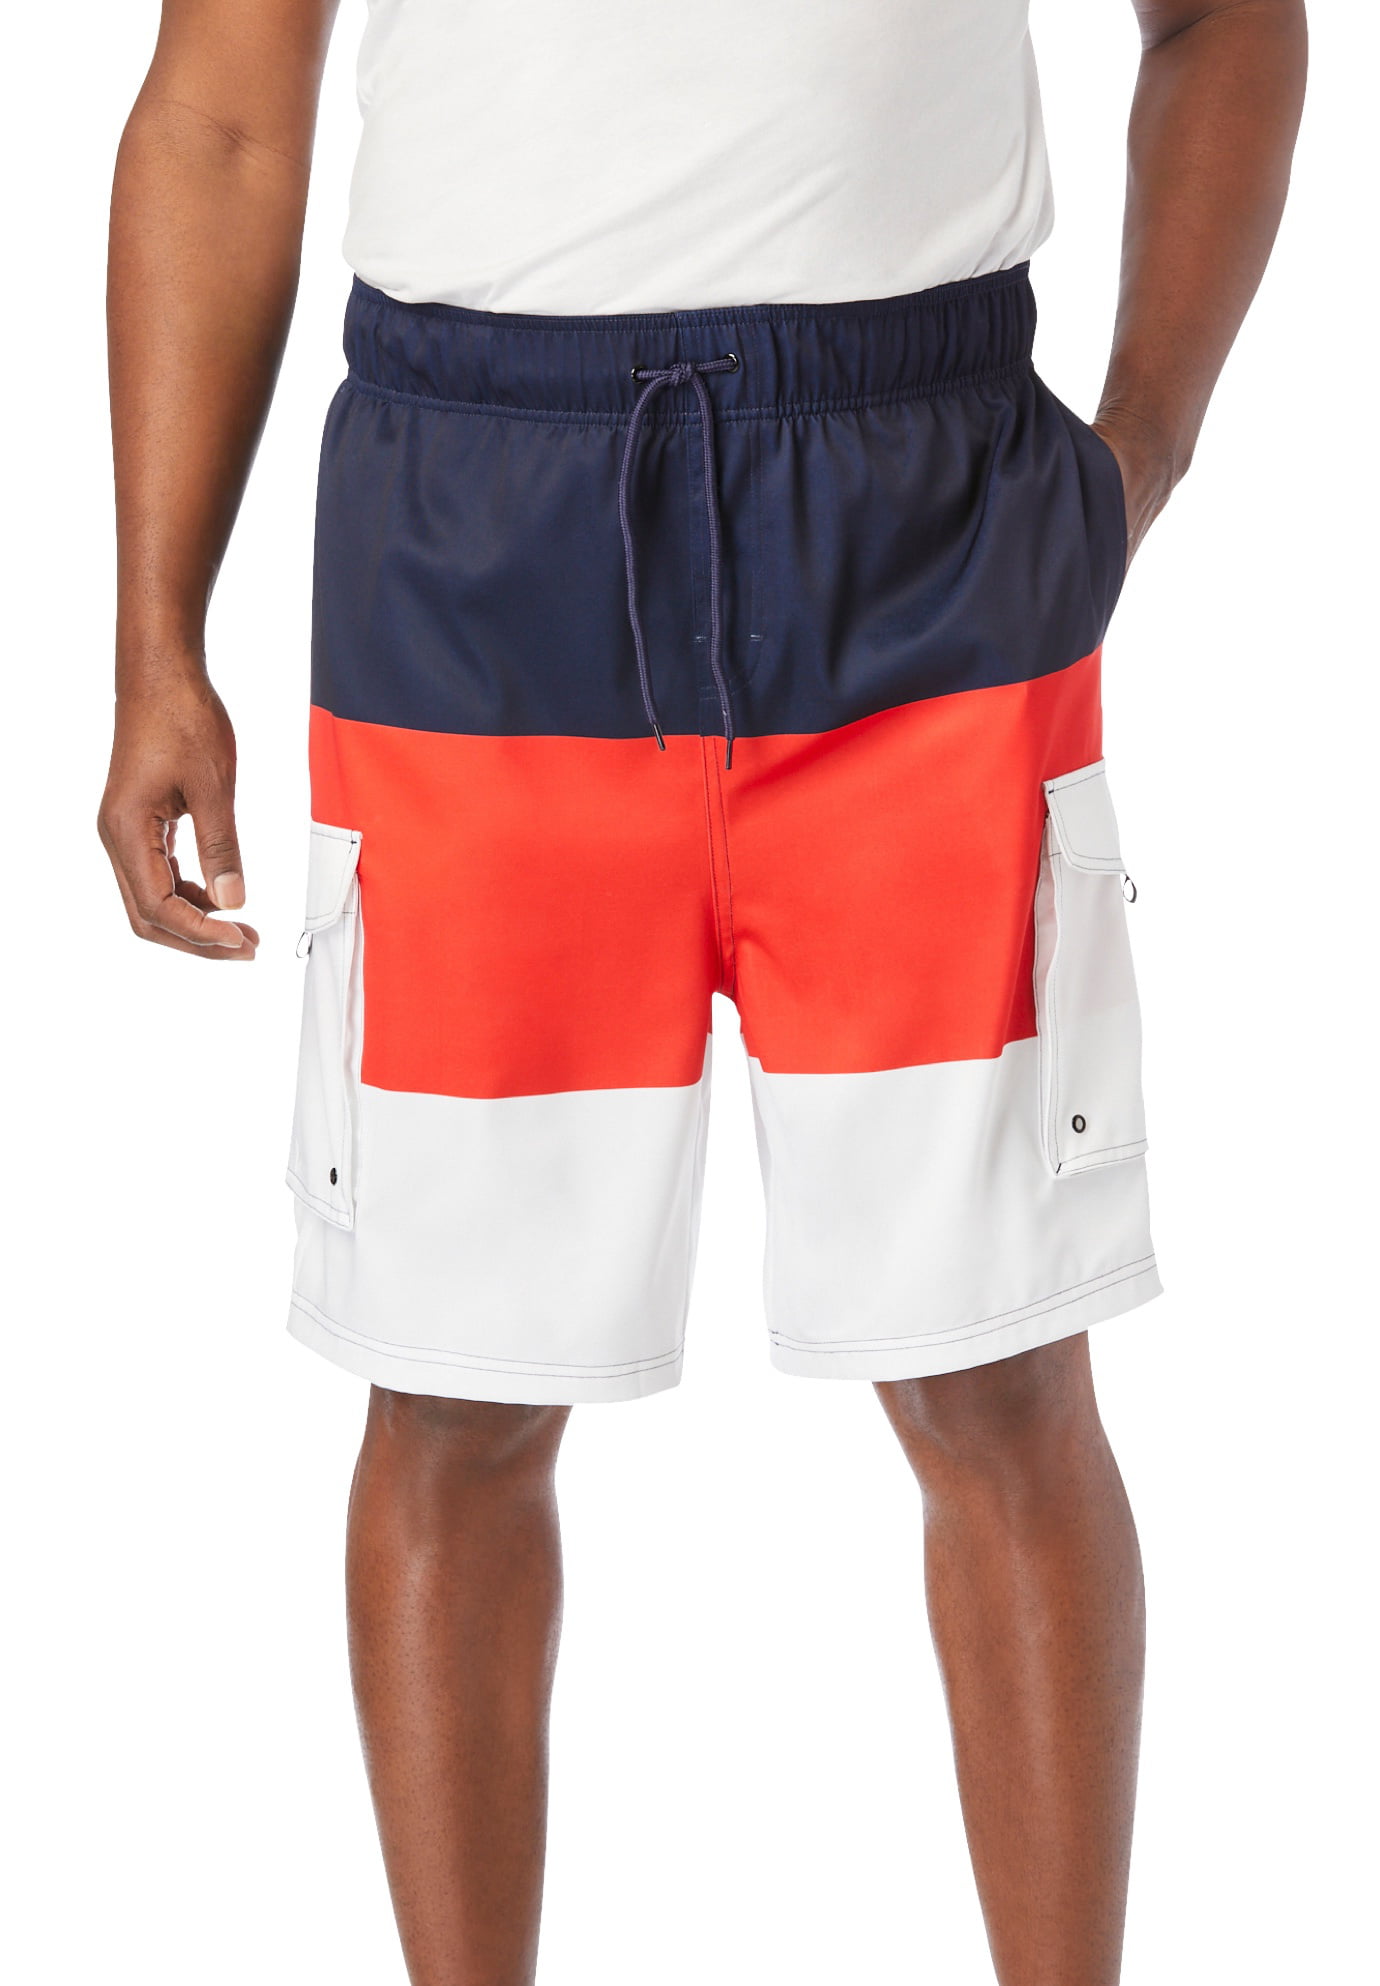 Sun Protection Large Size Swimming Shorts Plus Size UV Sun Protective Swim Shorts for Men & Women Sizes 3XL to 9XL.